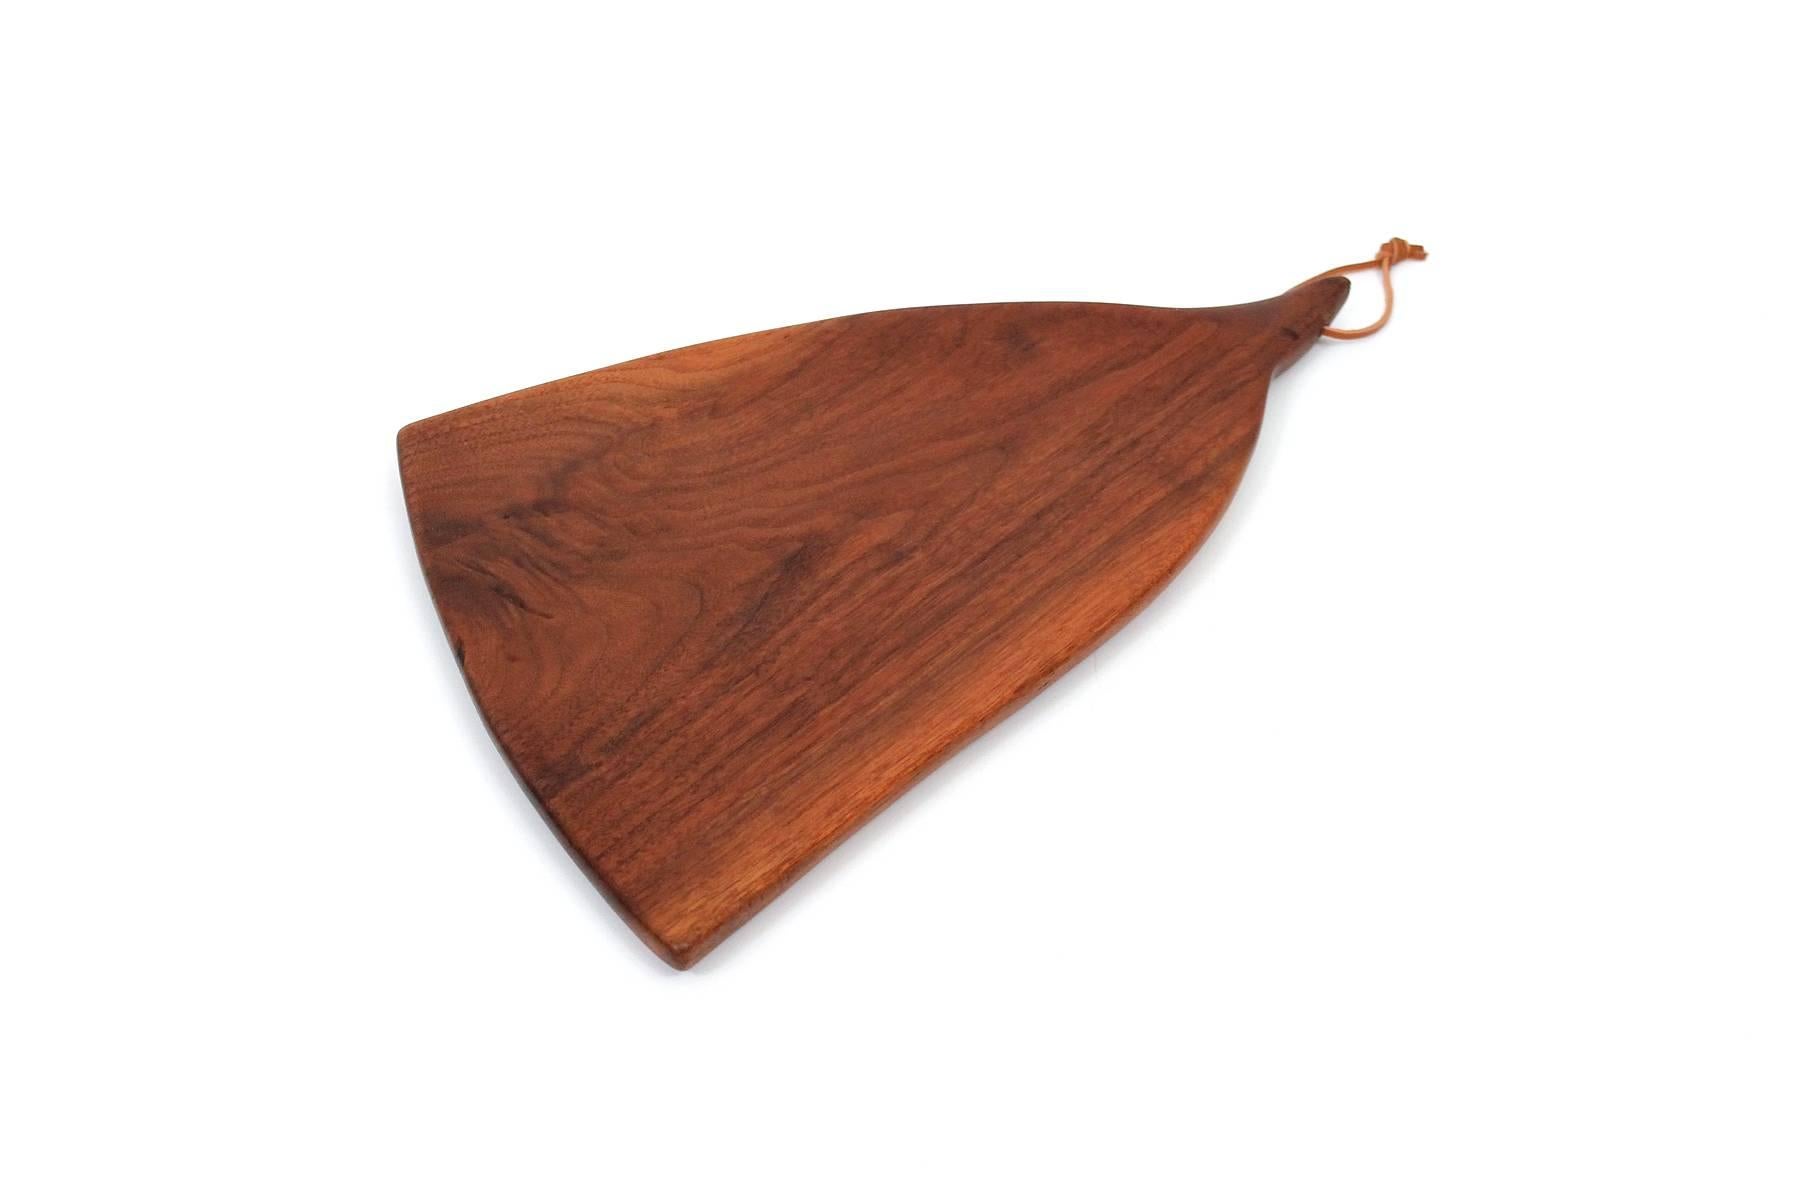 Rare cutting board in walnut by exhibited studio furniture maker Dirk Rosse. Sculptural and considered form. Rosse was born in the US, raised in Holland, and settled in Millbrook, NY where he crafted wooden furniture and objects. Signed with his DDR